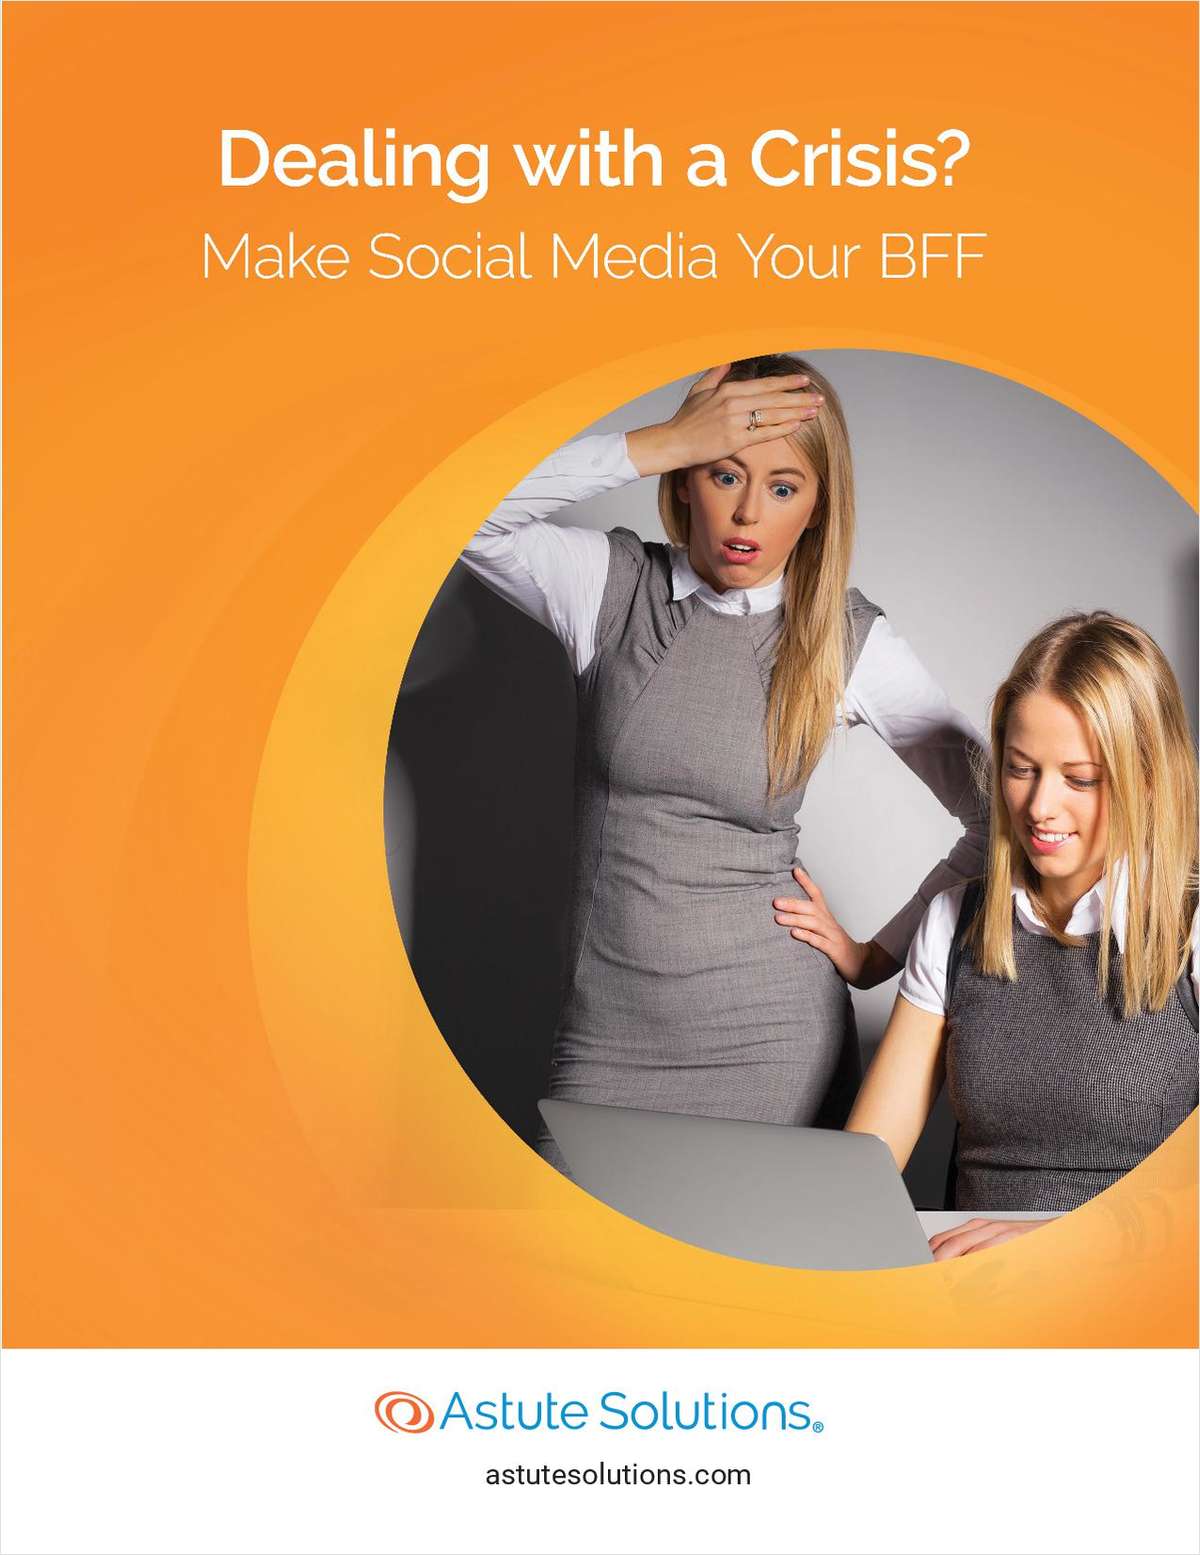 Dealing with a Crisis? Make Social Media Your BFF